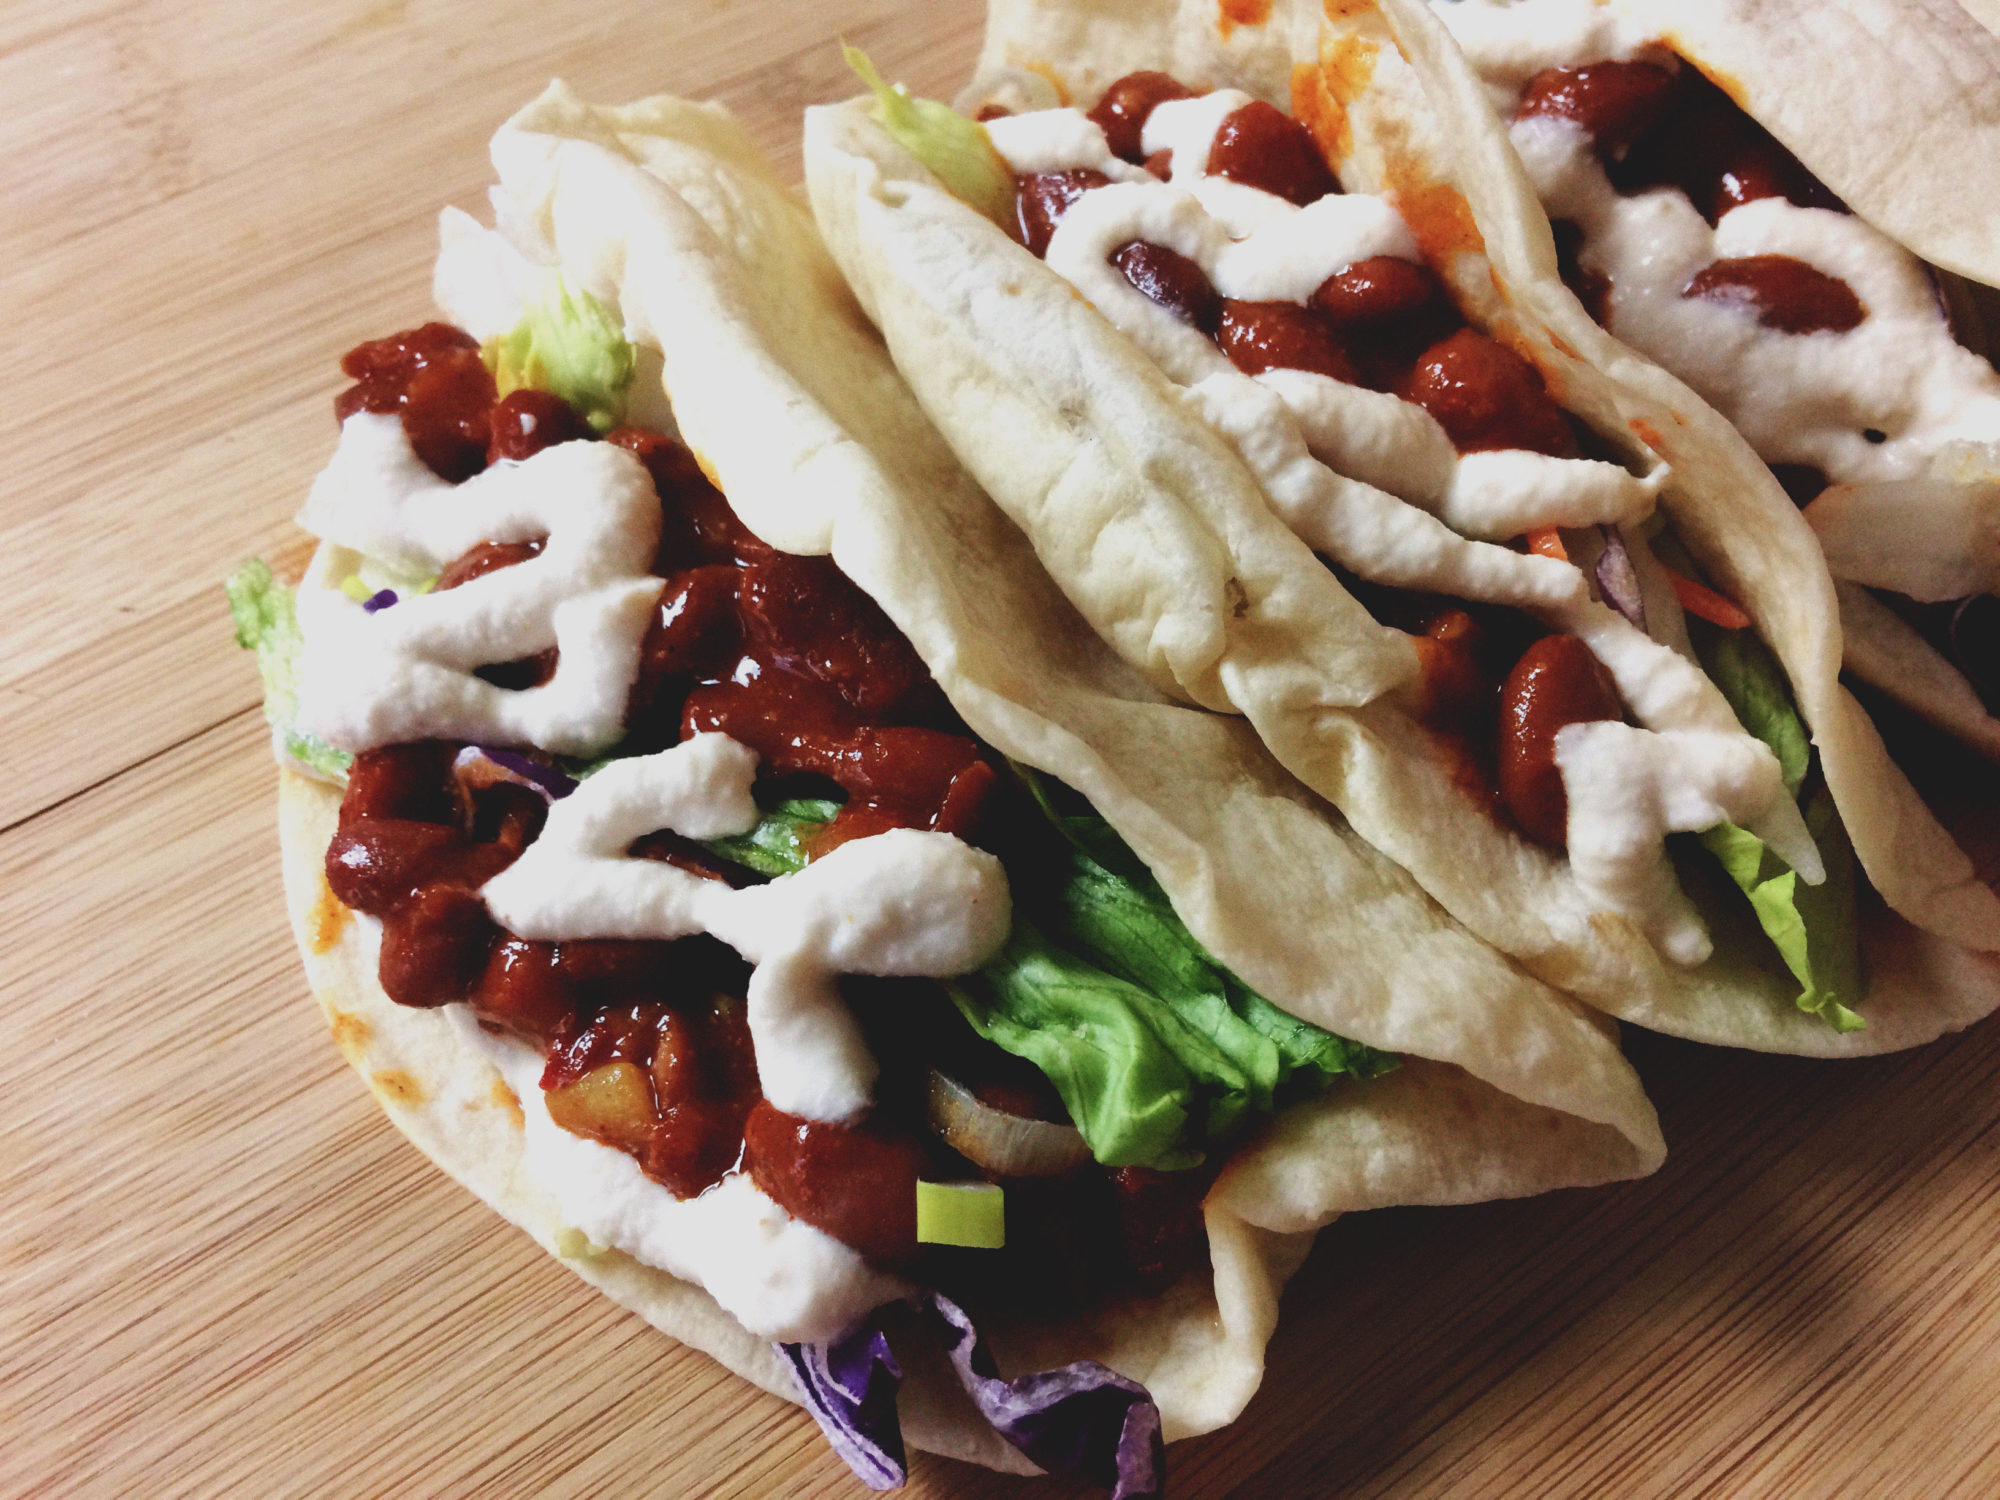 Spicy Red Bean Tacos with Zesty Cashew Cream Sauce